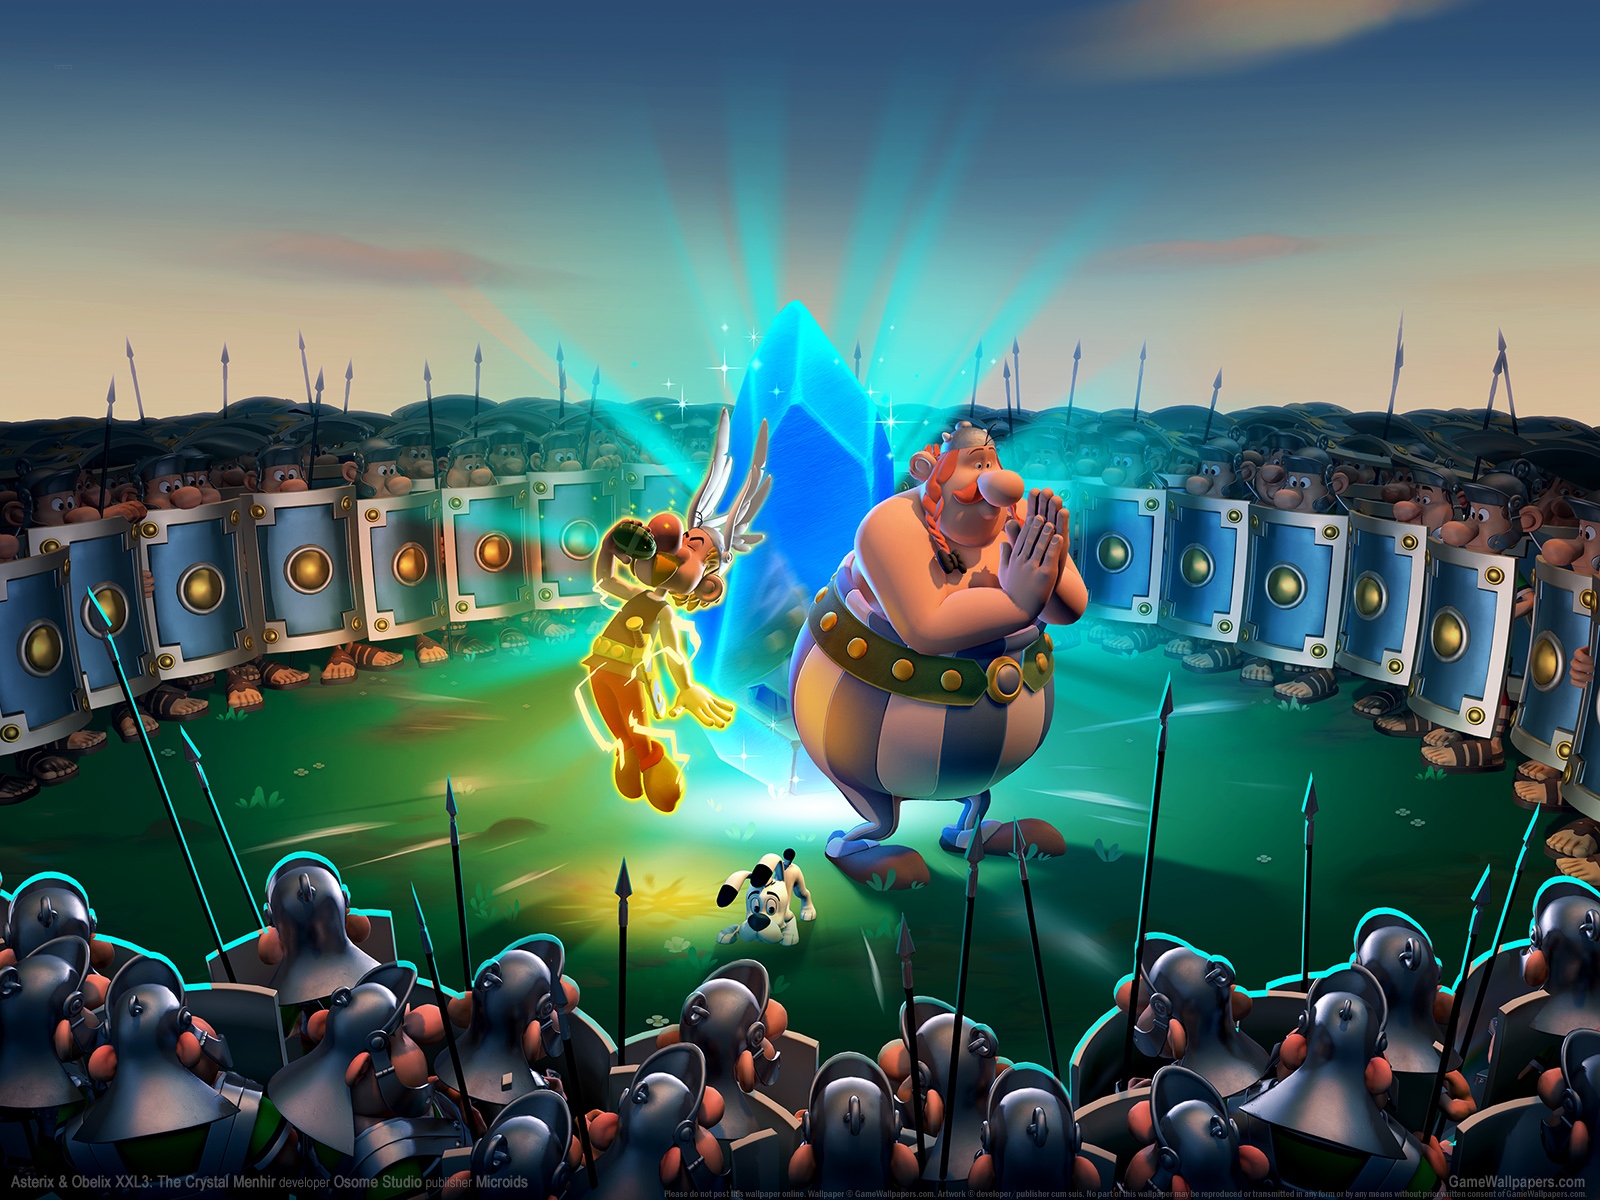 Asterix & Obelix XXL3: The Crystal Menhir 1600 wallpaper or background 01